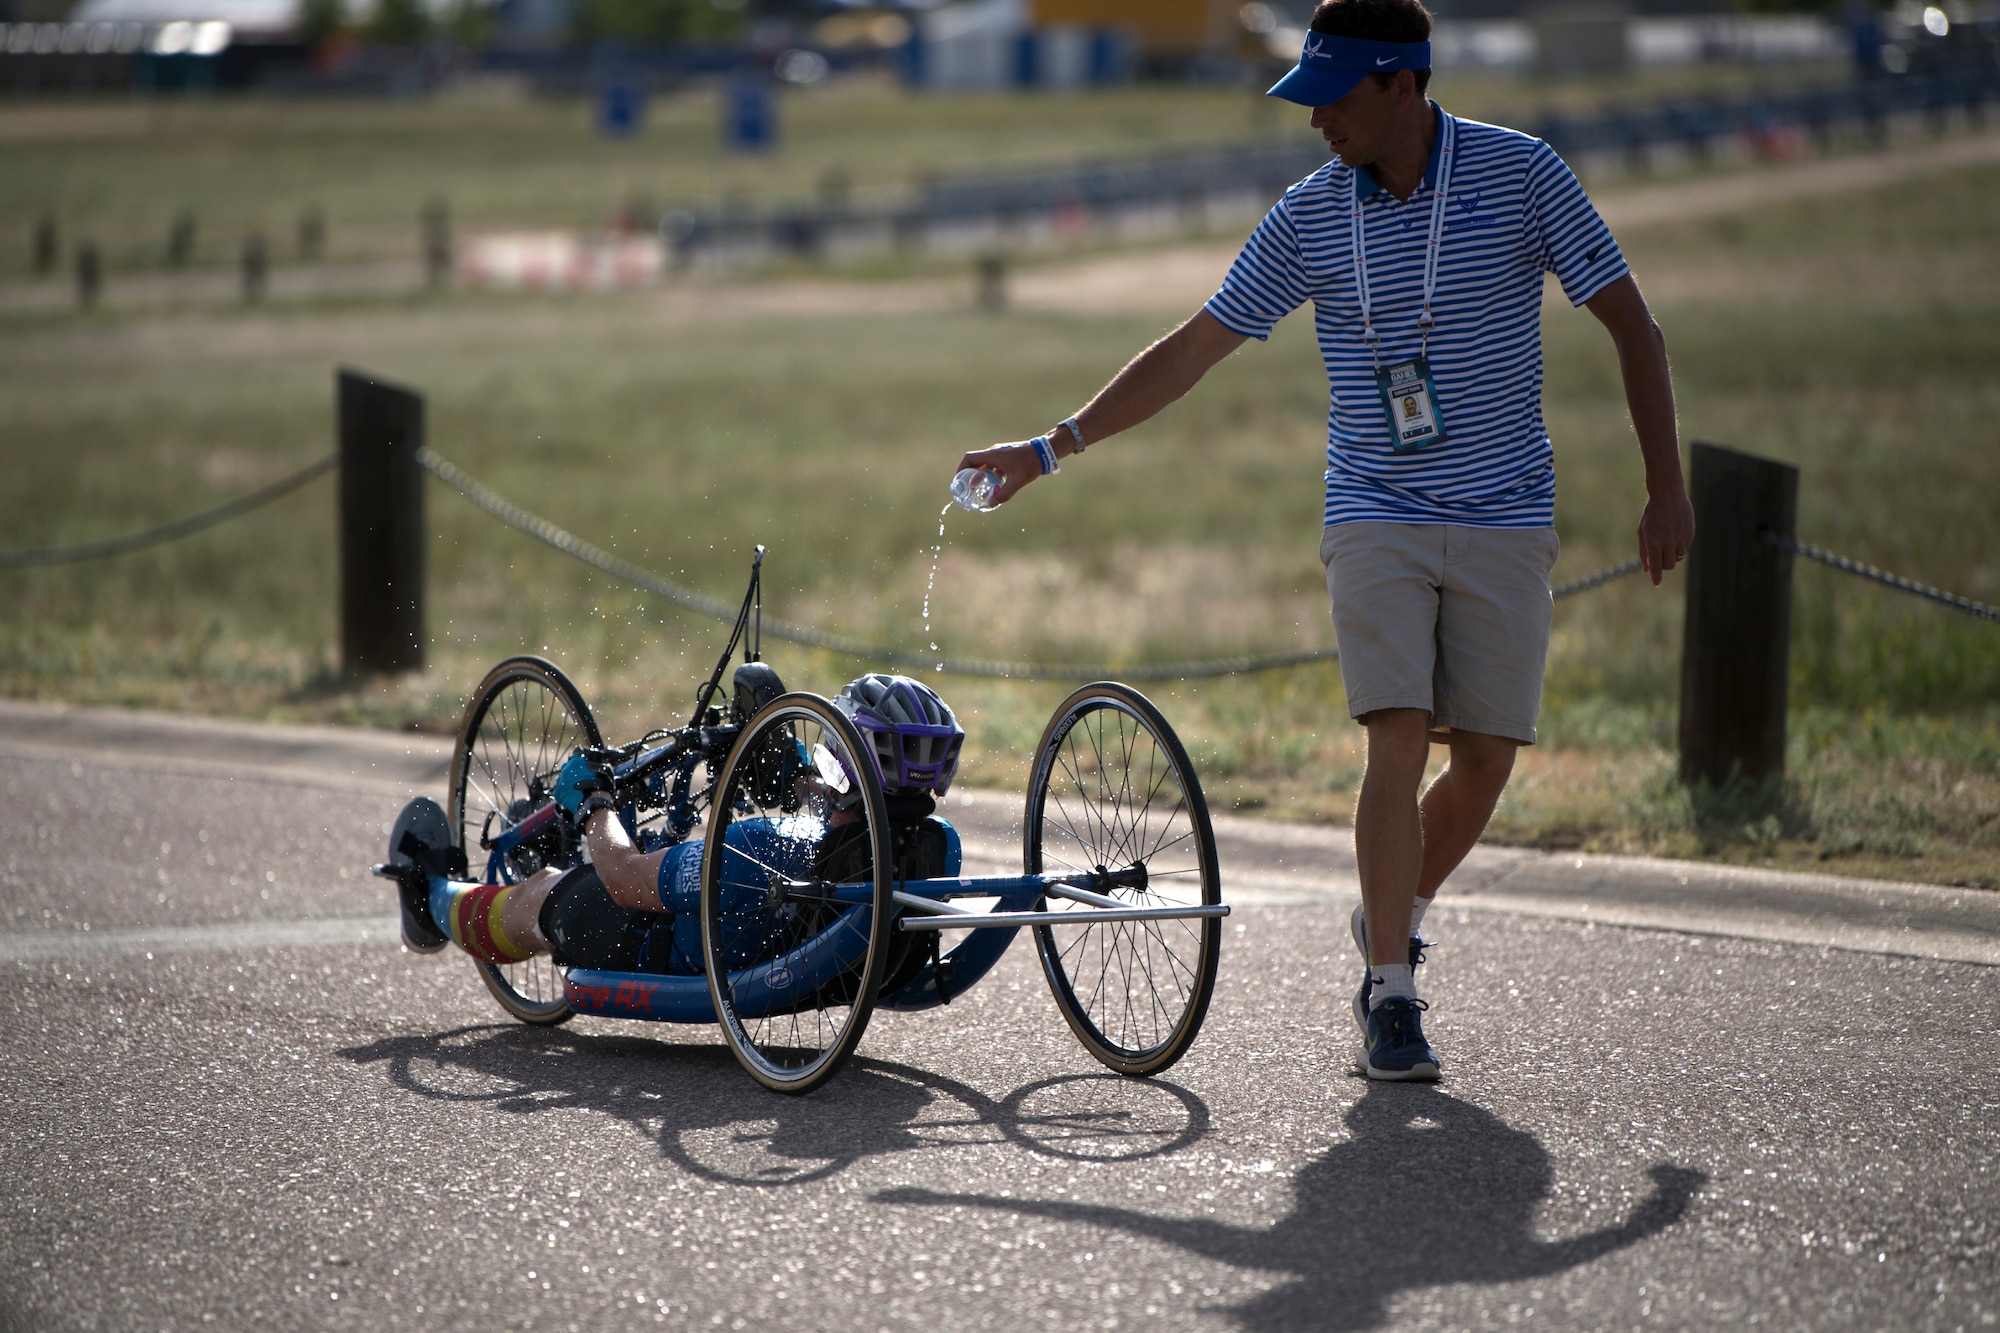 Air Force Coach Aaron Moffett pours water over Master Sgt. Lisa Goad, Team Air Force athlete, during the 2018 DoD Warrior Games cycling competition at the U.S. Air Force Academy in Colorado Springs, Colo. on June 6, 2018. (DoD photo by EJ Hersom)